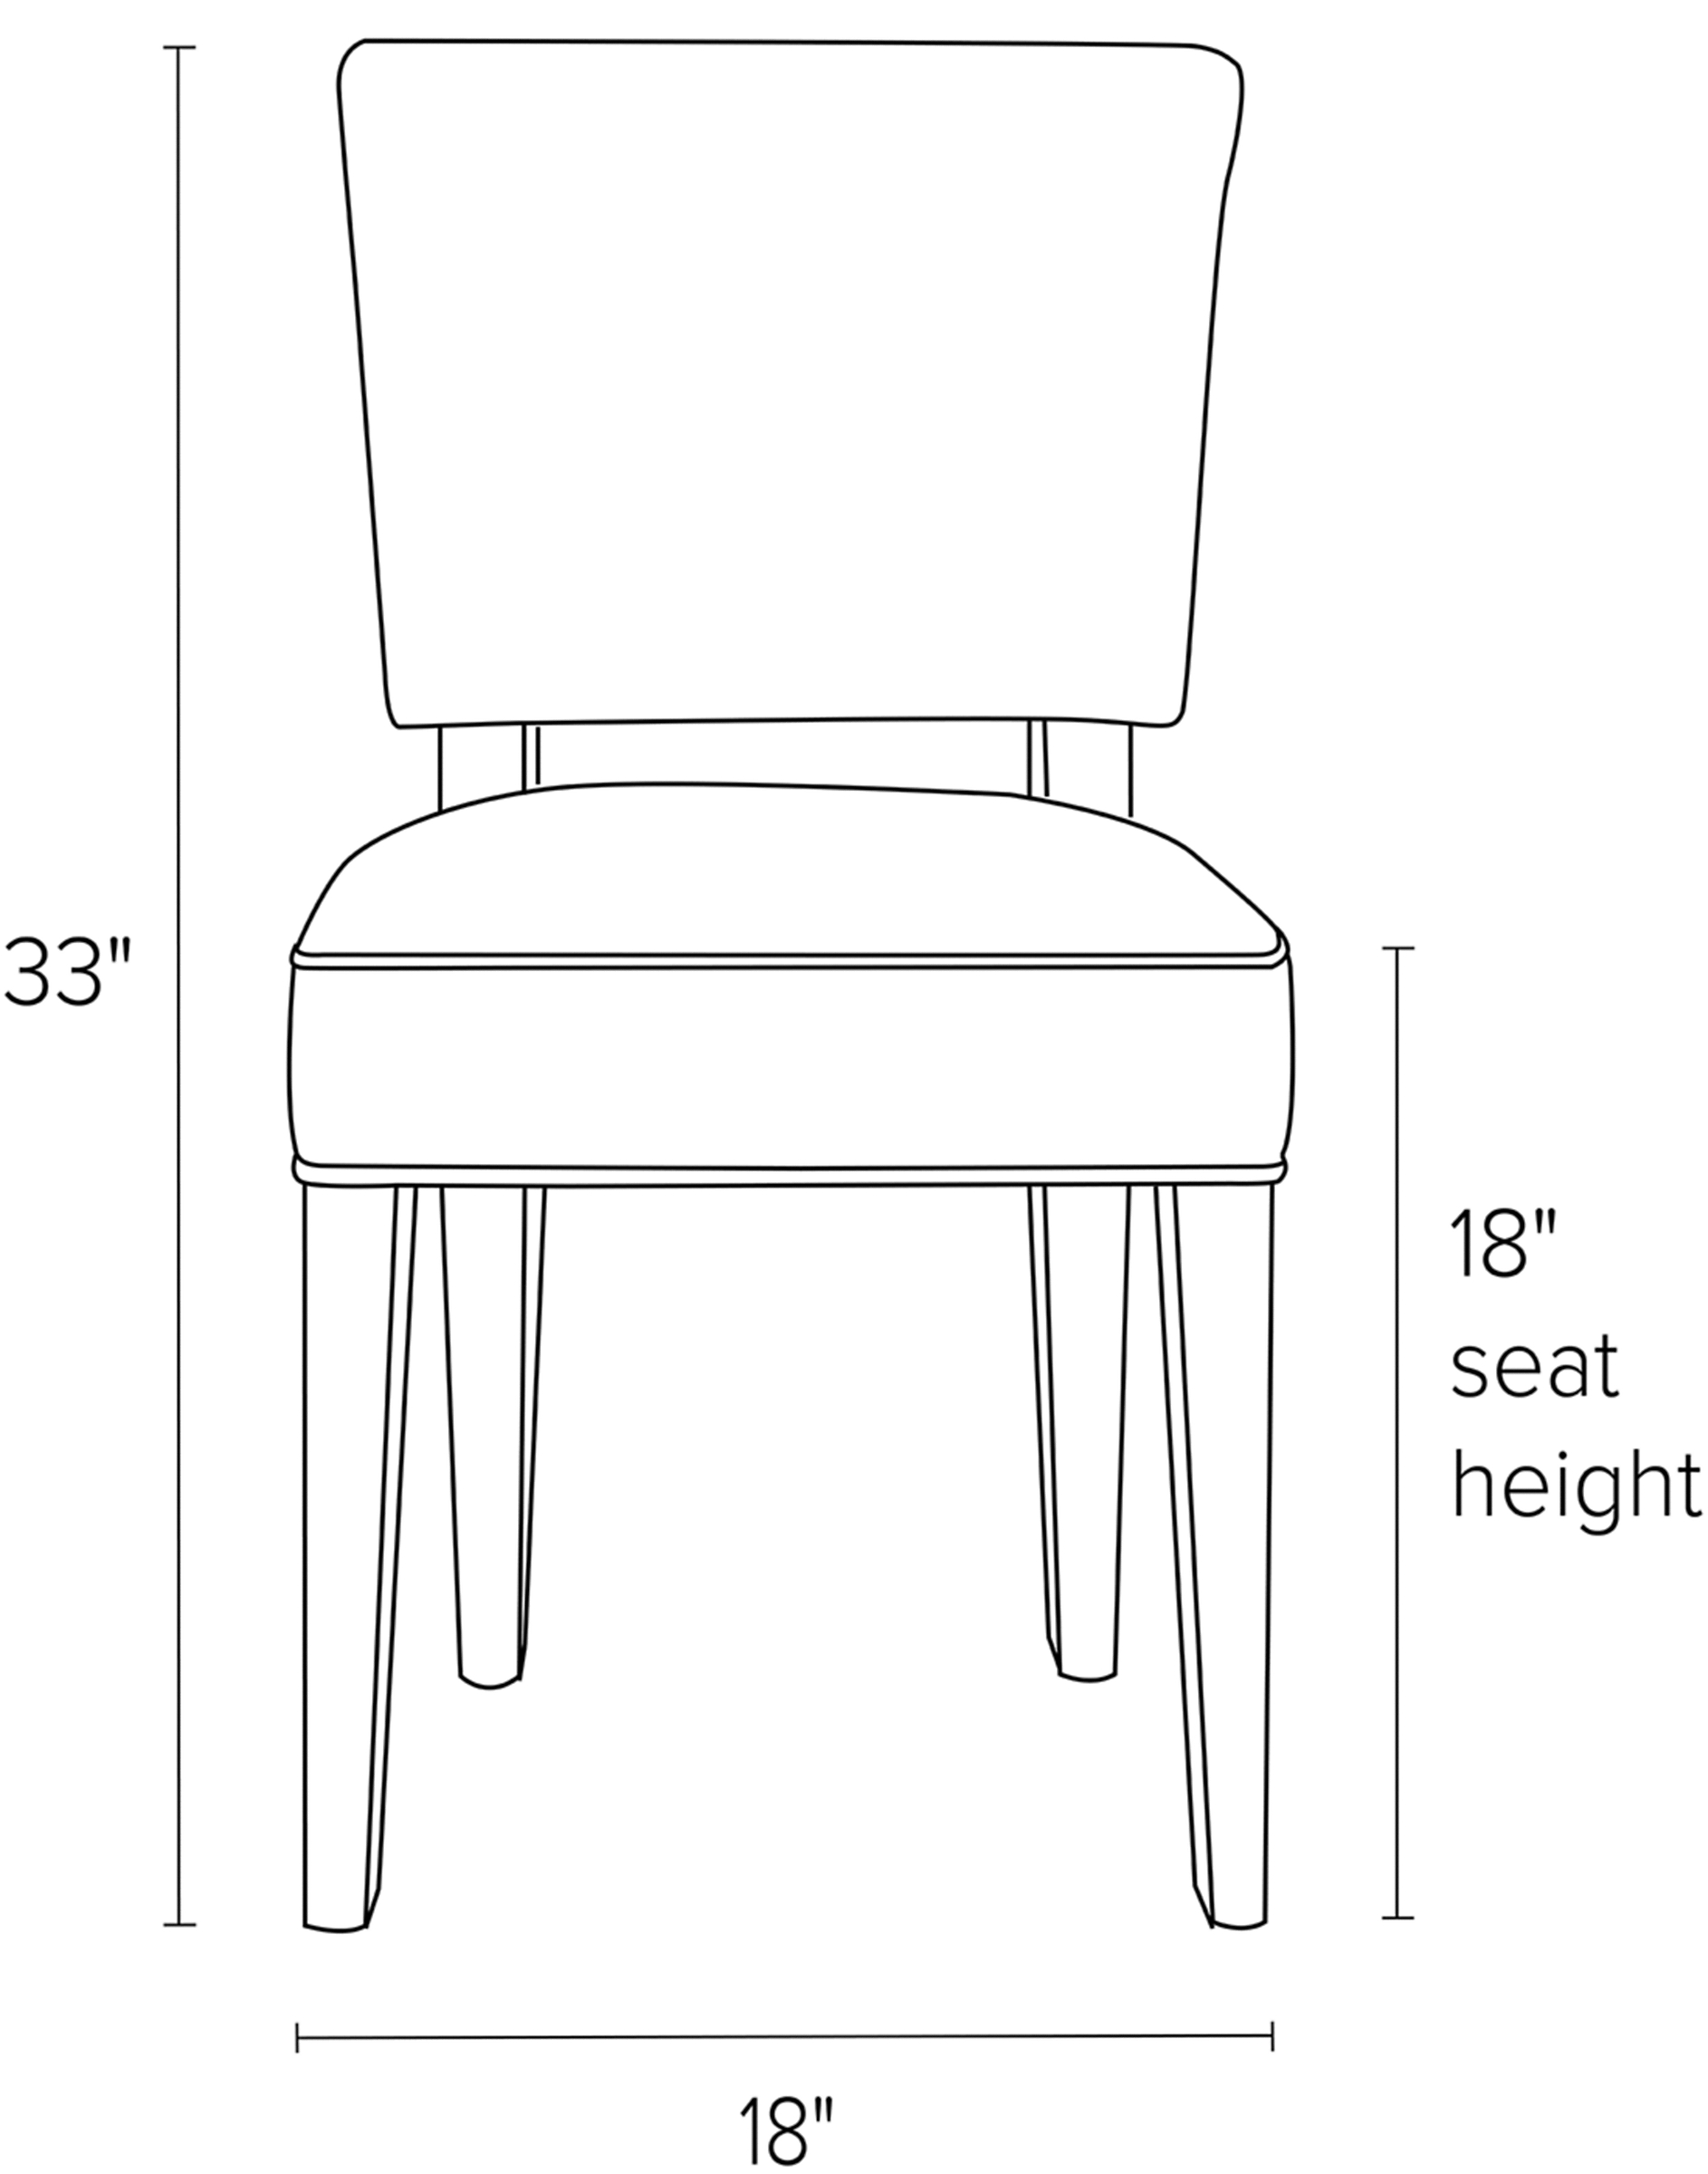 Front view dimension illustration of Georgia side chair.